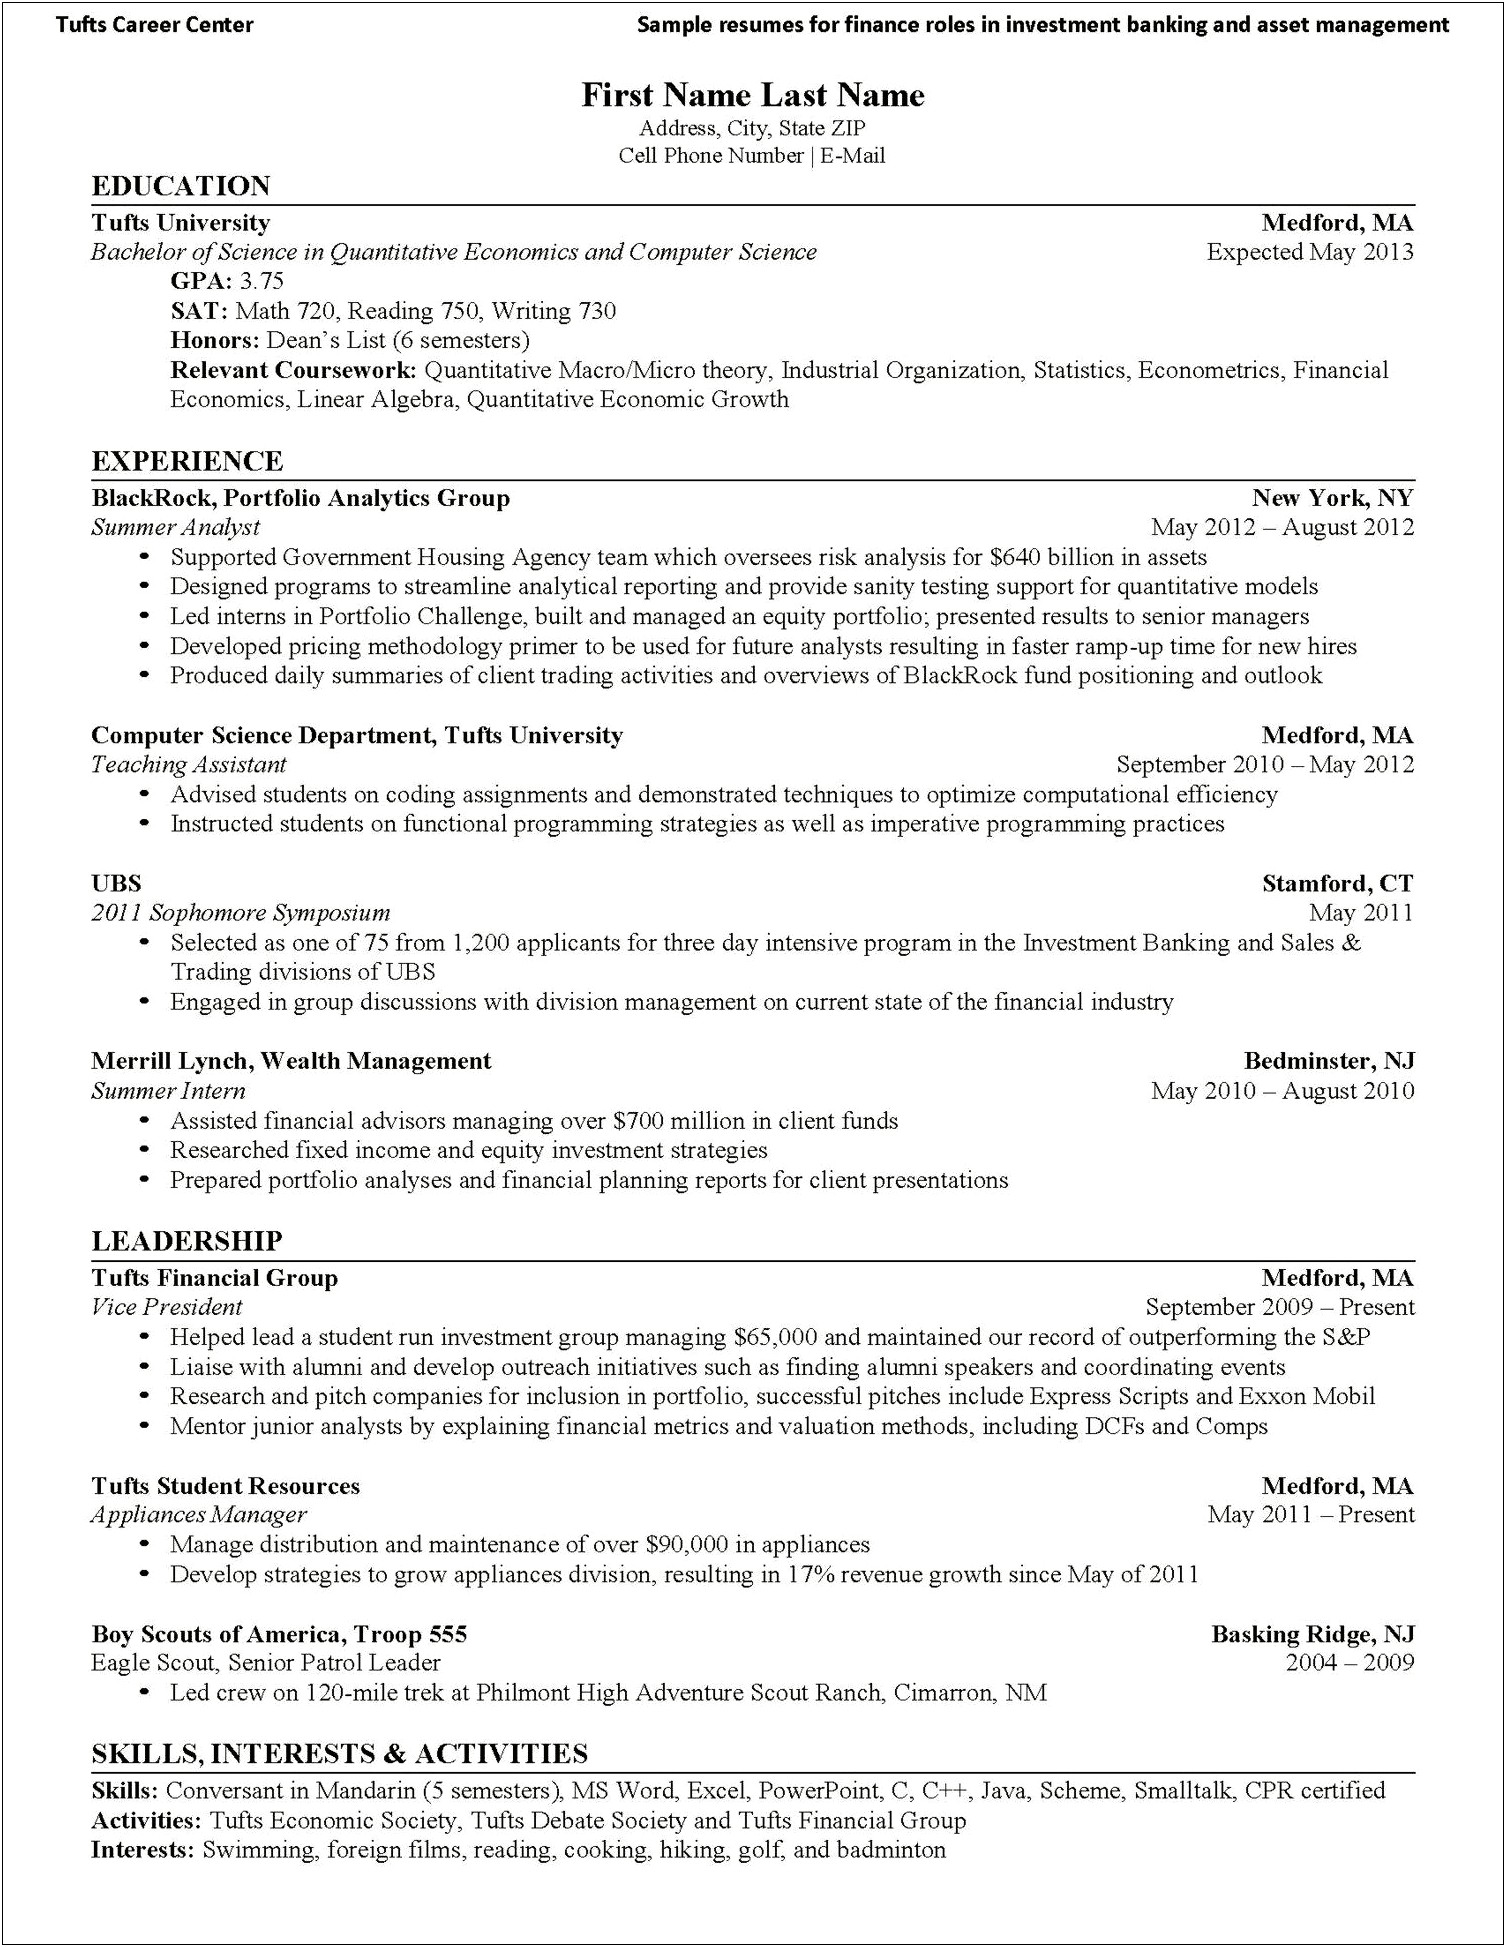 Financial Resume Skills And Interests